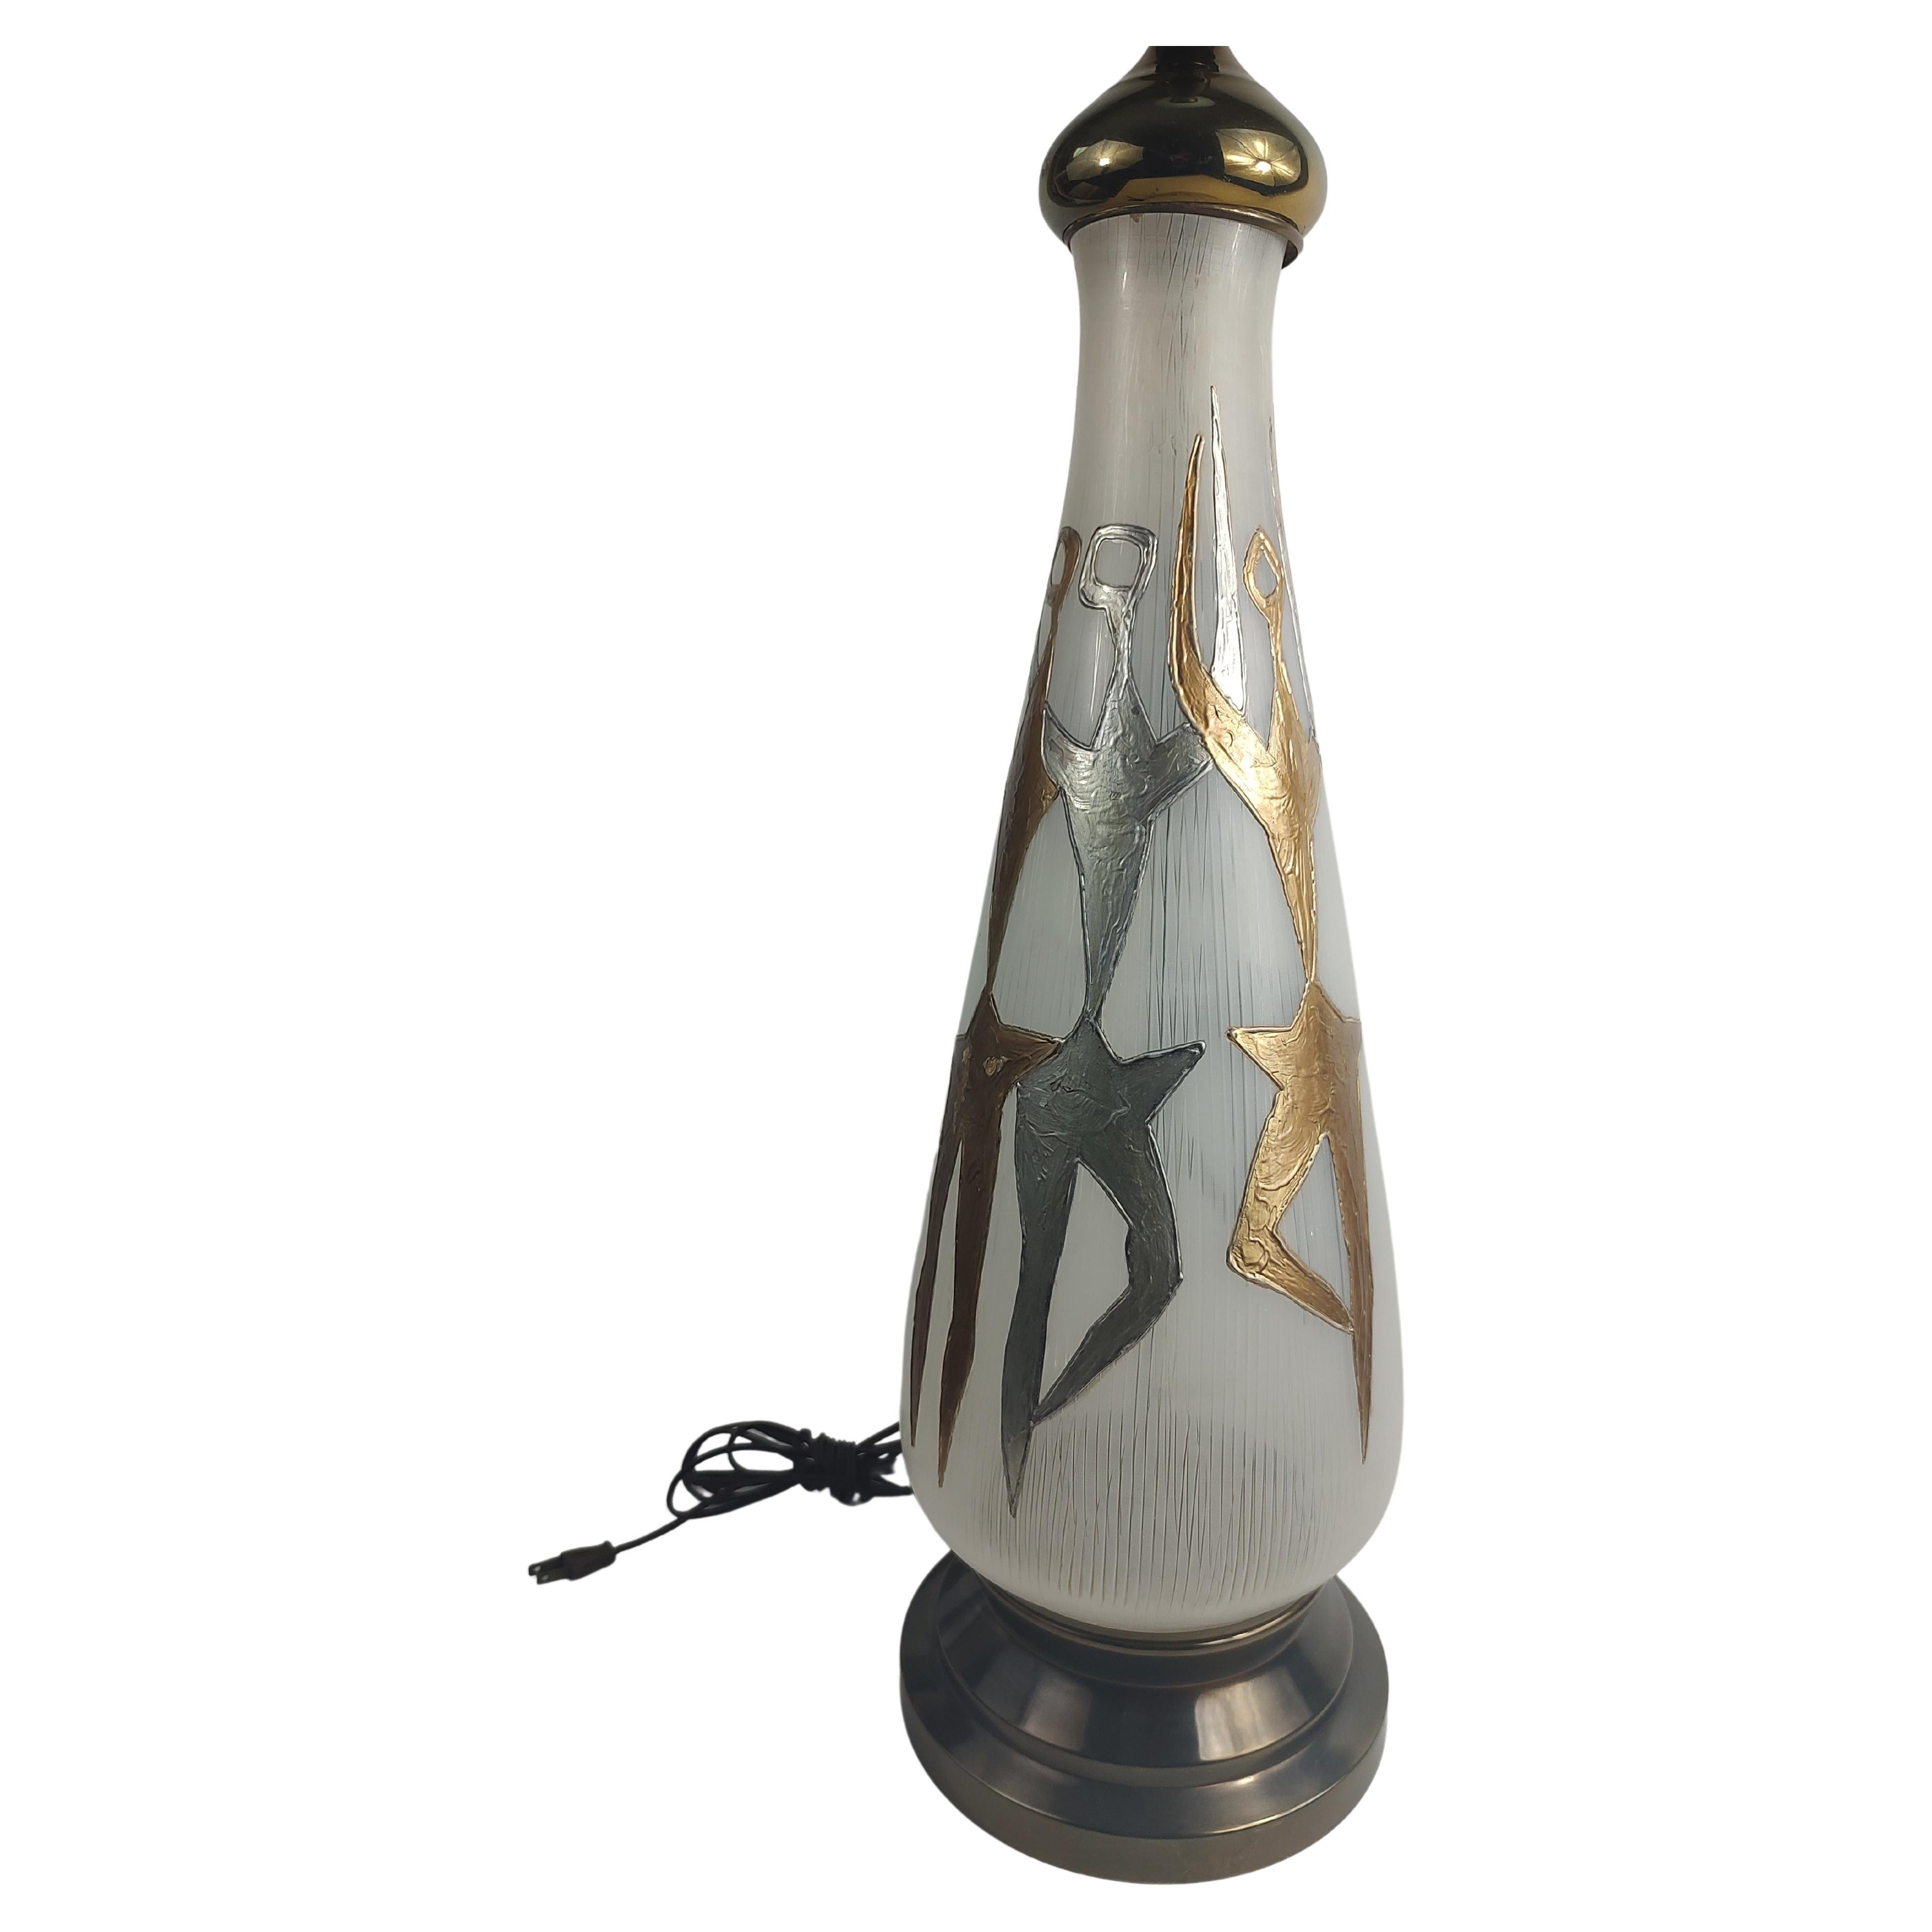 Fabulous stylized glass table lamp with modern dancers in gold and silver. Milk glass diffuser sits atop brass stem. In excellent vintage condition with minimal wear. Includes pictured shade which is intact but in delicate condition.